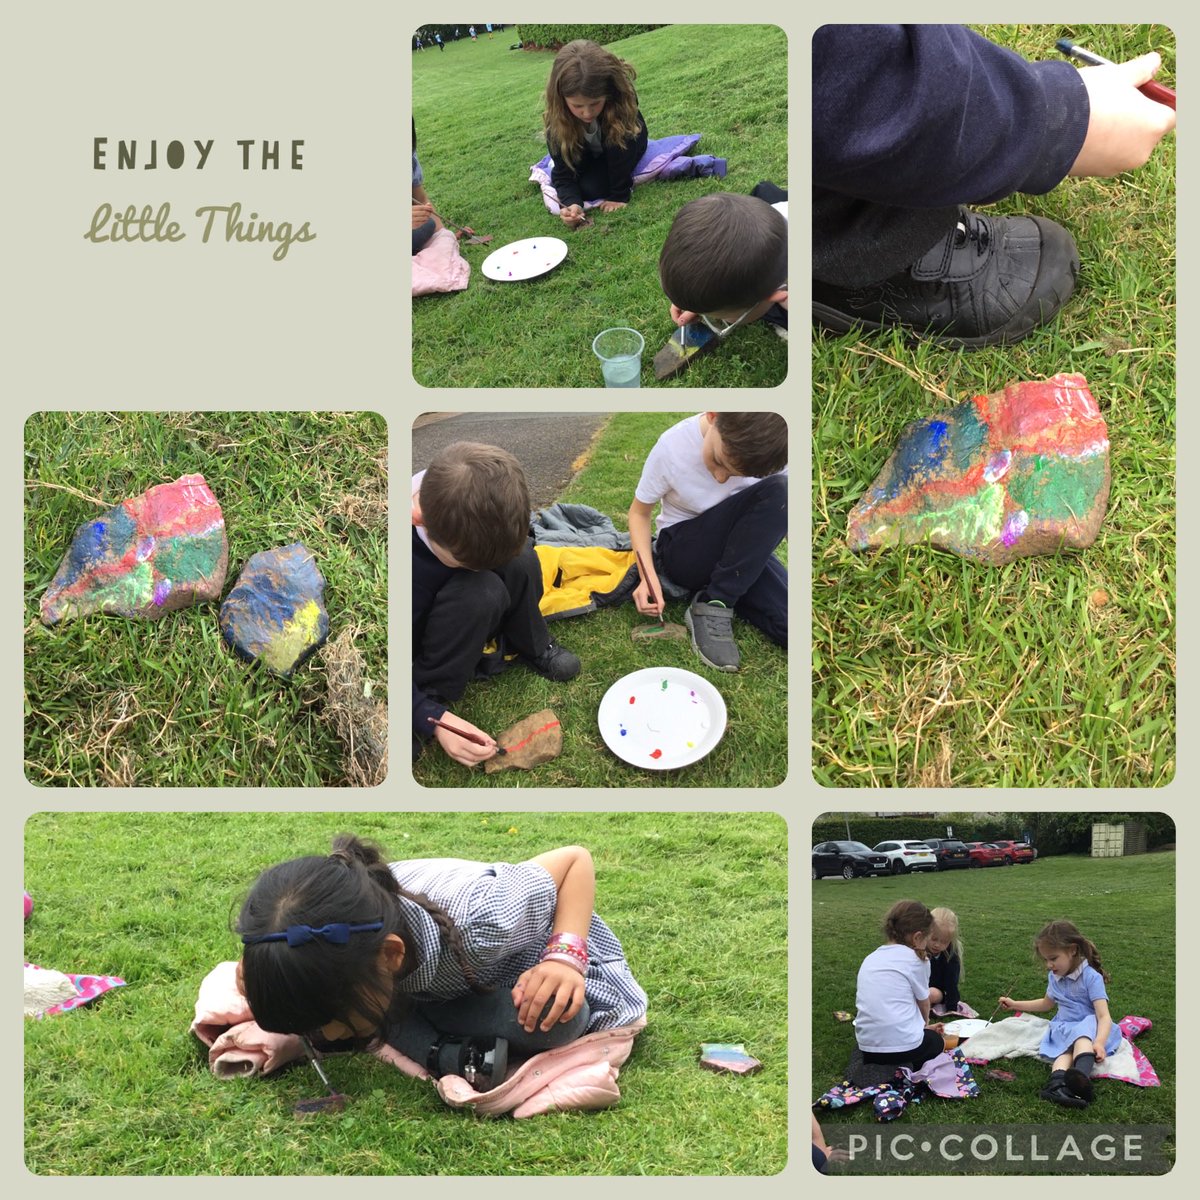 Positivity rocks! This week in well-being club, we enjoyed being outside in the fresh air and painting rocks. #wellbeingwednesday #TPA